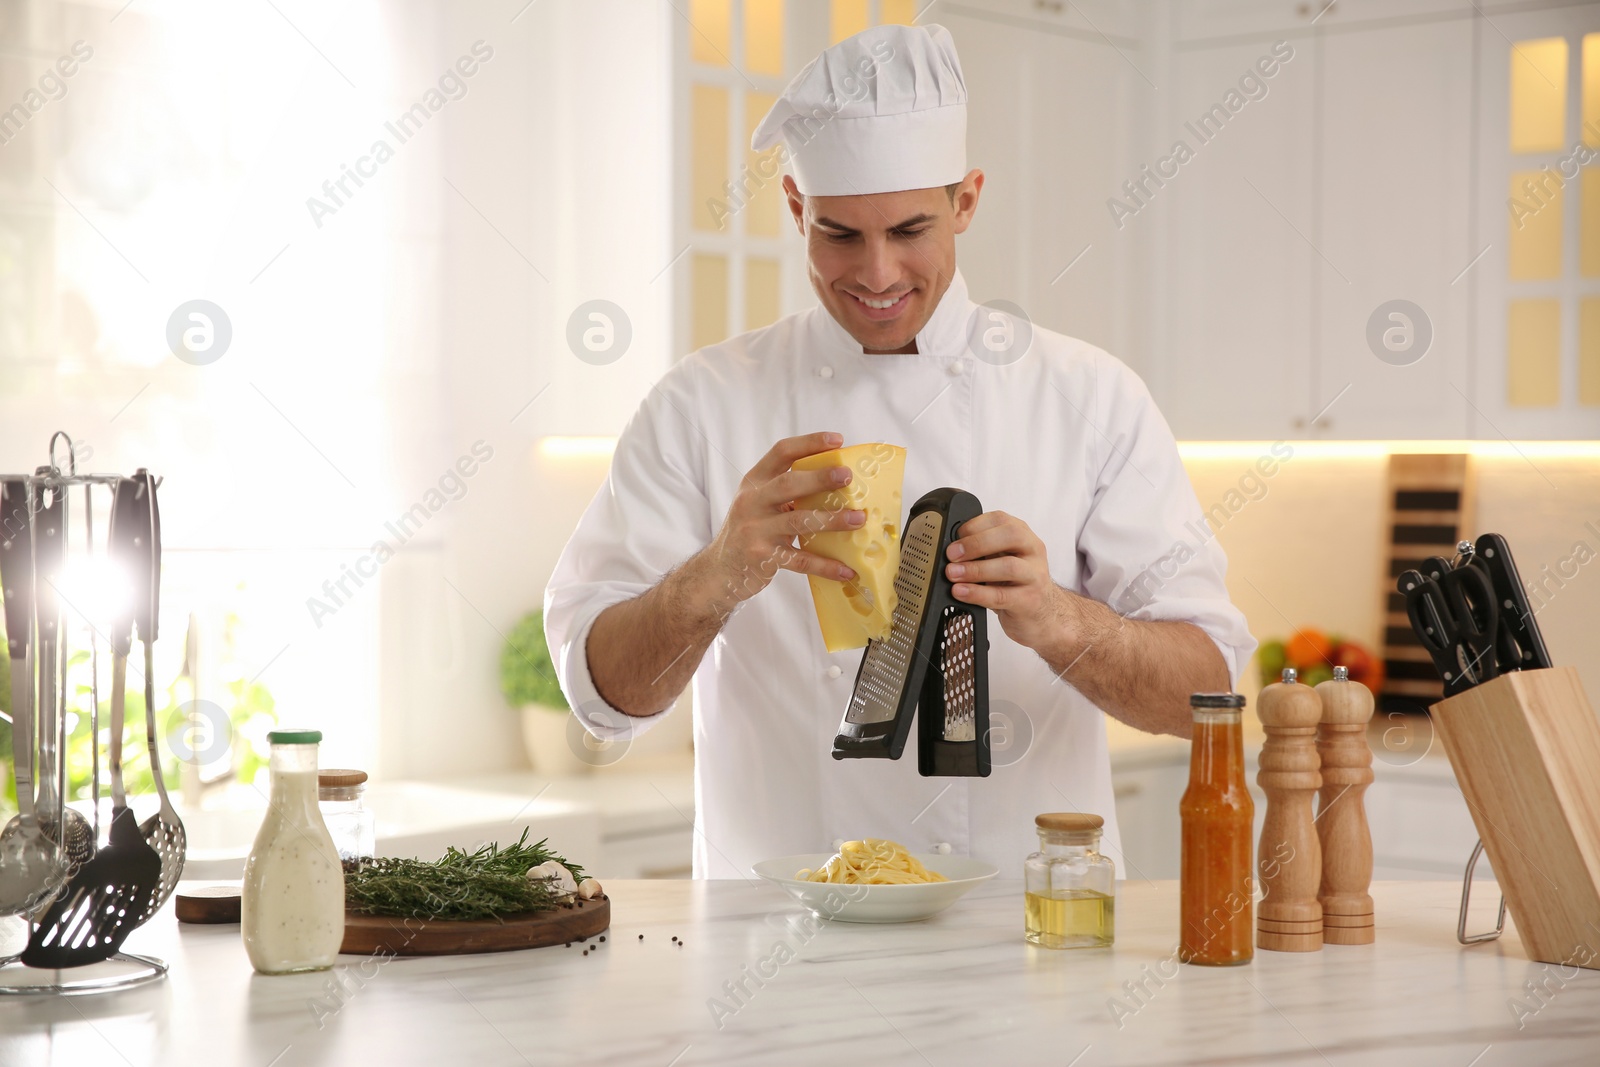 Photo of Professional chef cooking at table in kitchen